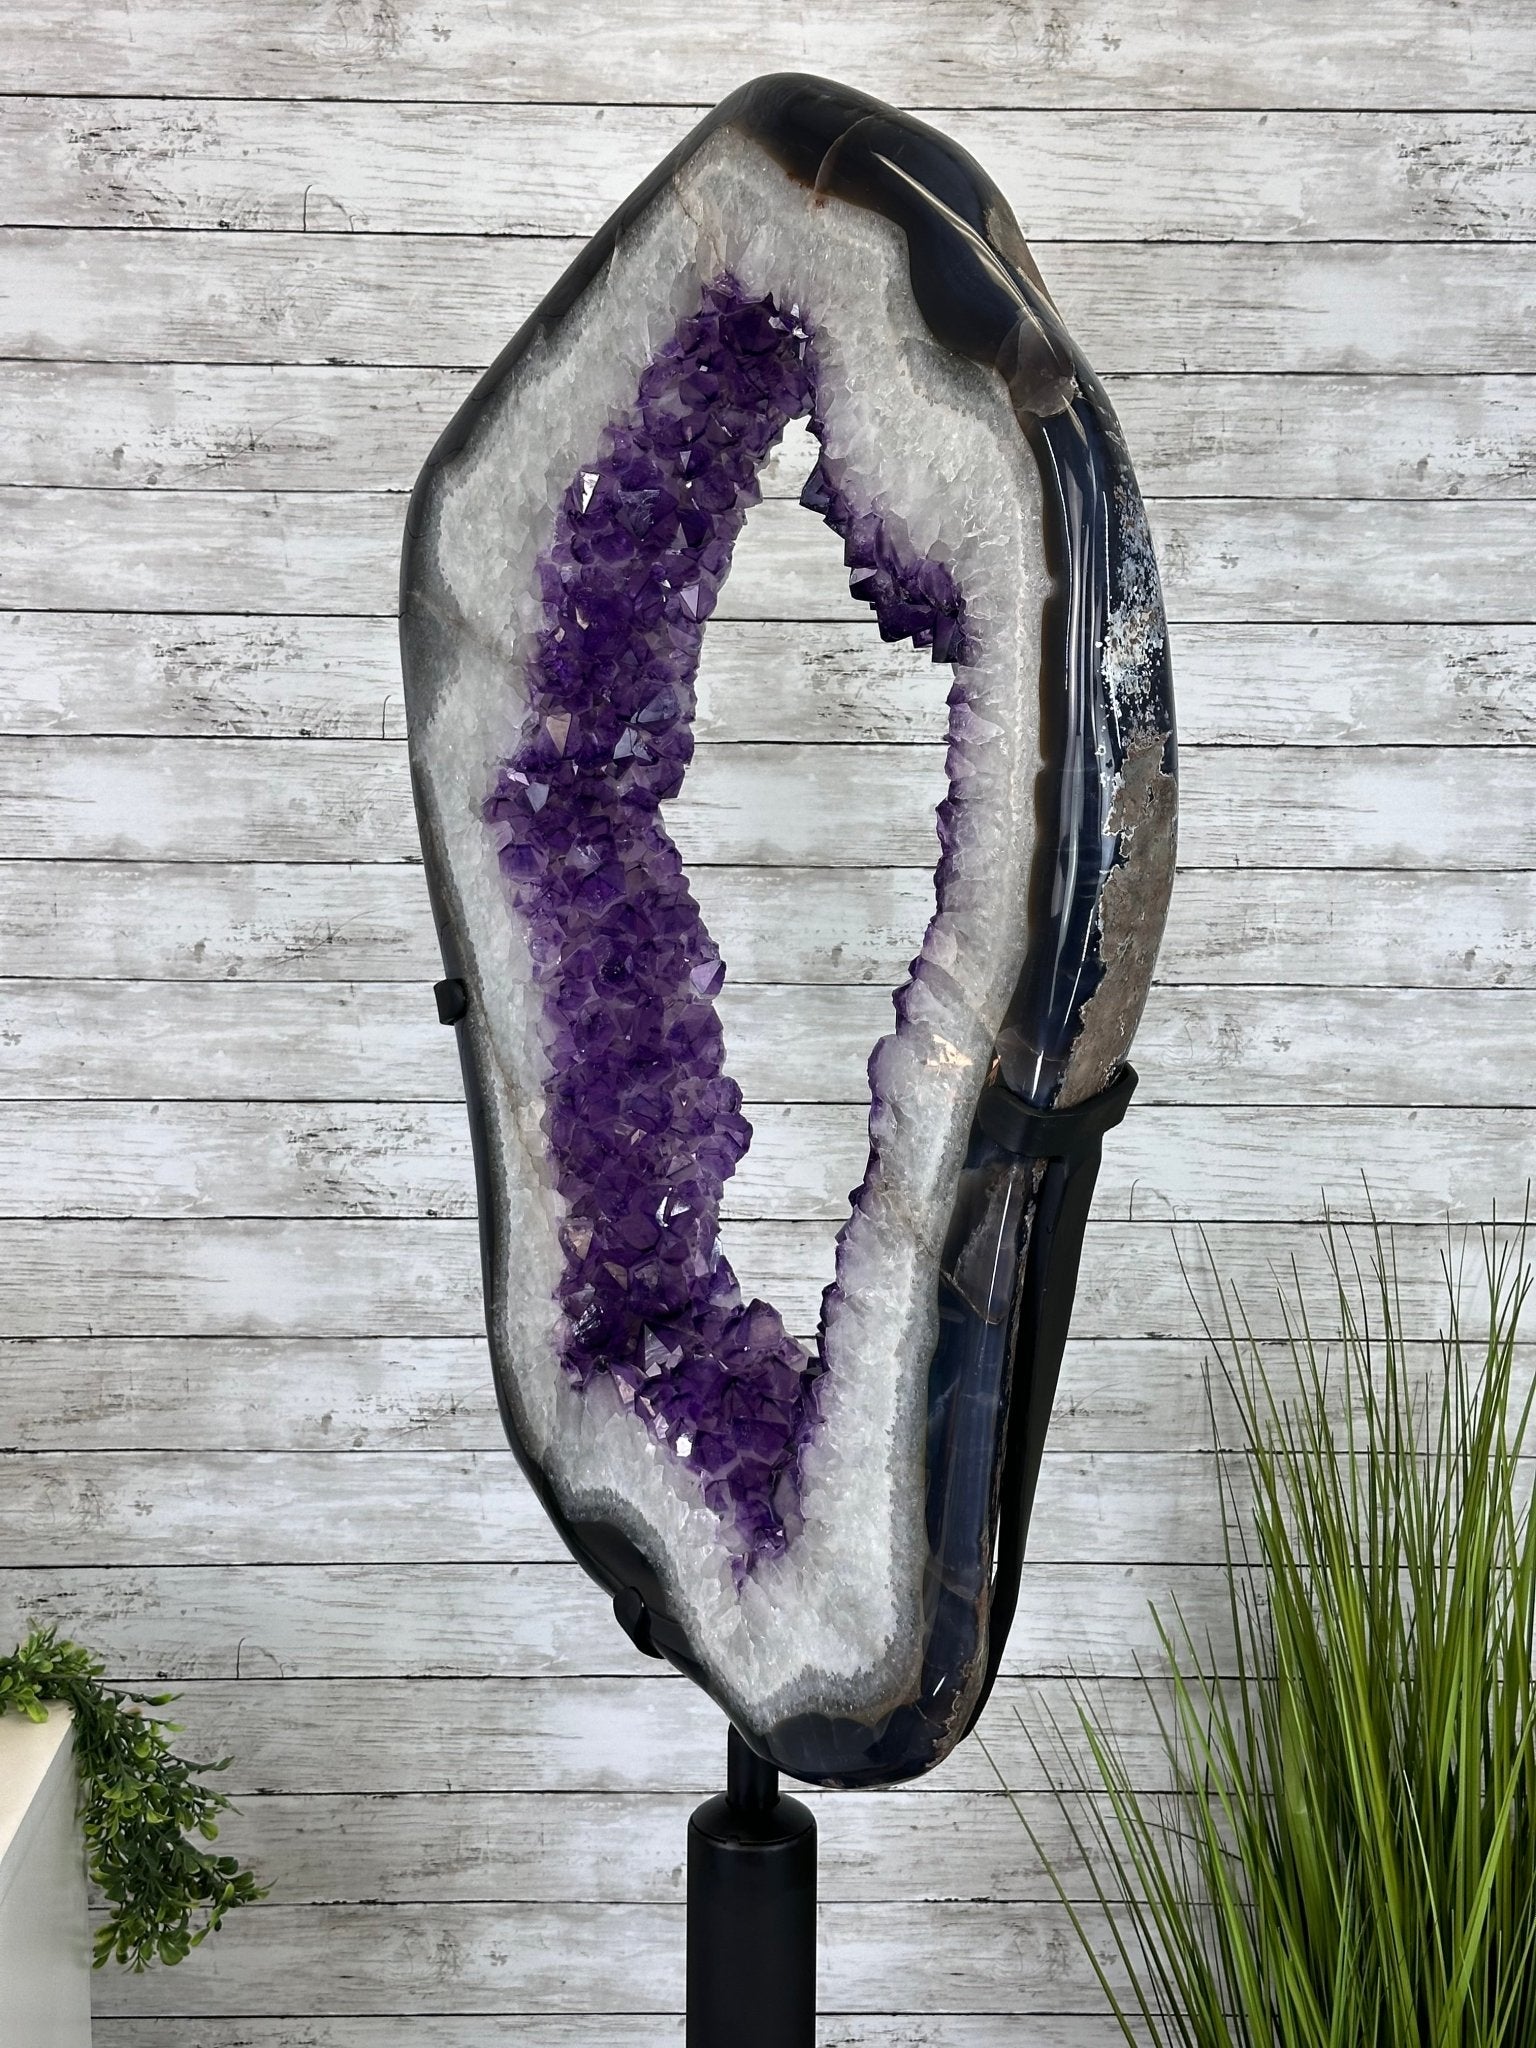 Super Quality Amethyst Portal, Rotating Stand, 185 lbs & 71" tall #5604-0130 - Brazil GemsBrazil GemsSuper Quality Amethyst Portal, Rotating Stand, 185 lbs & 71" tall #5604-0130Portals on Rotating Bases5604-0130